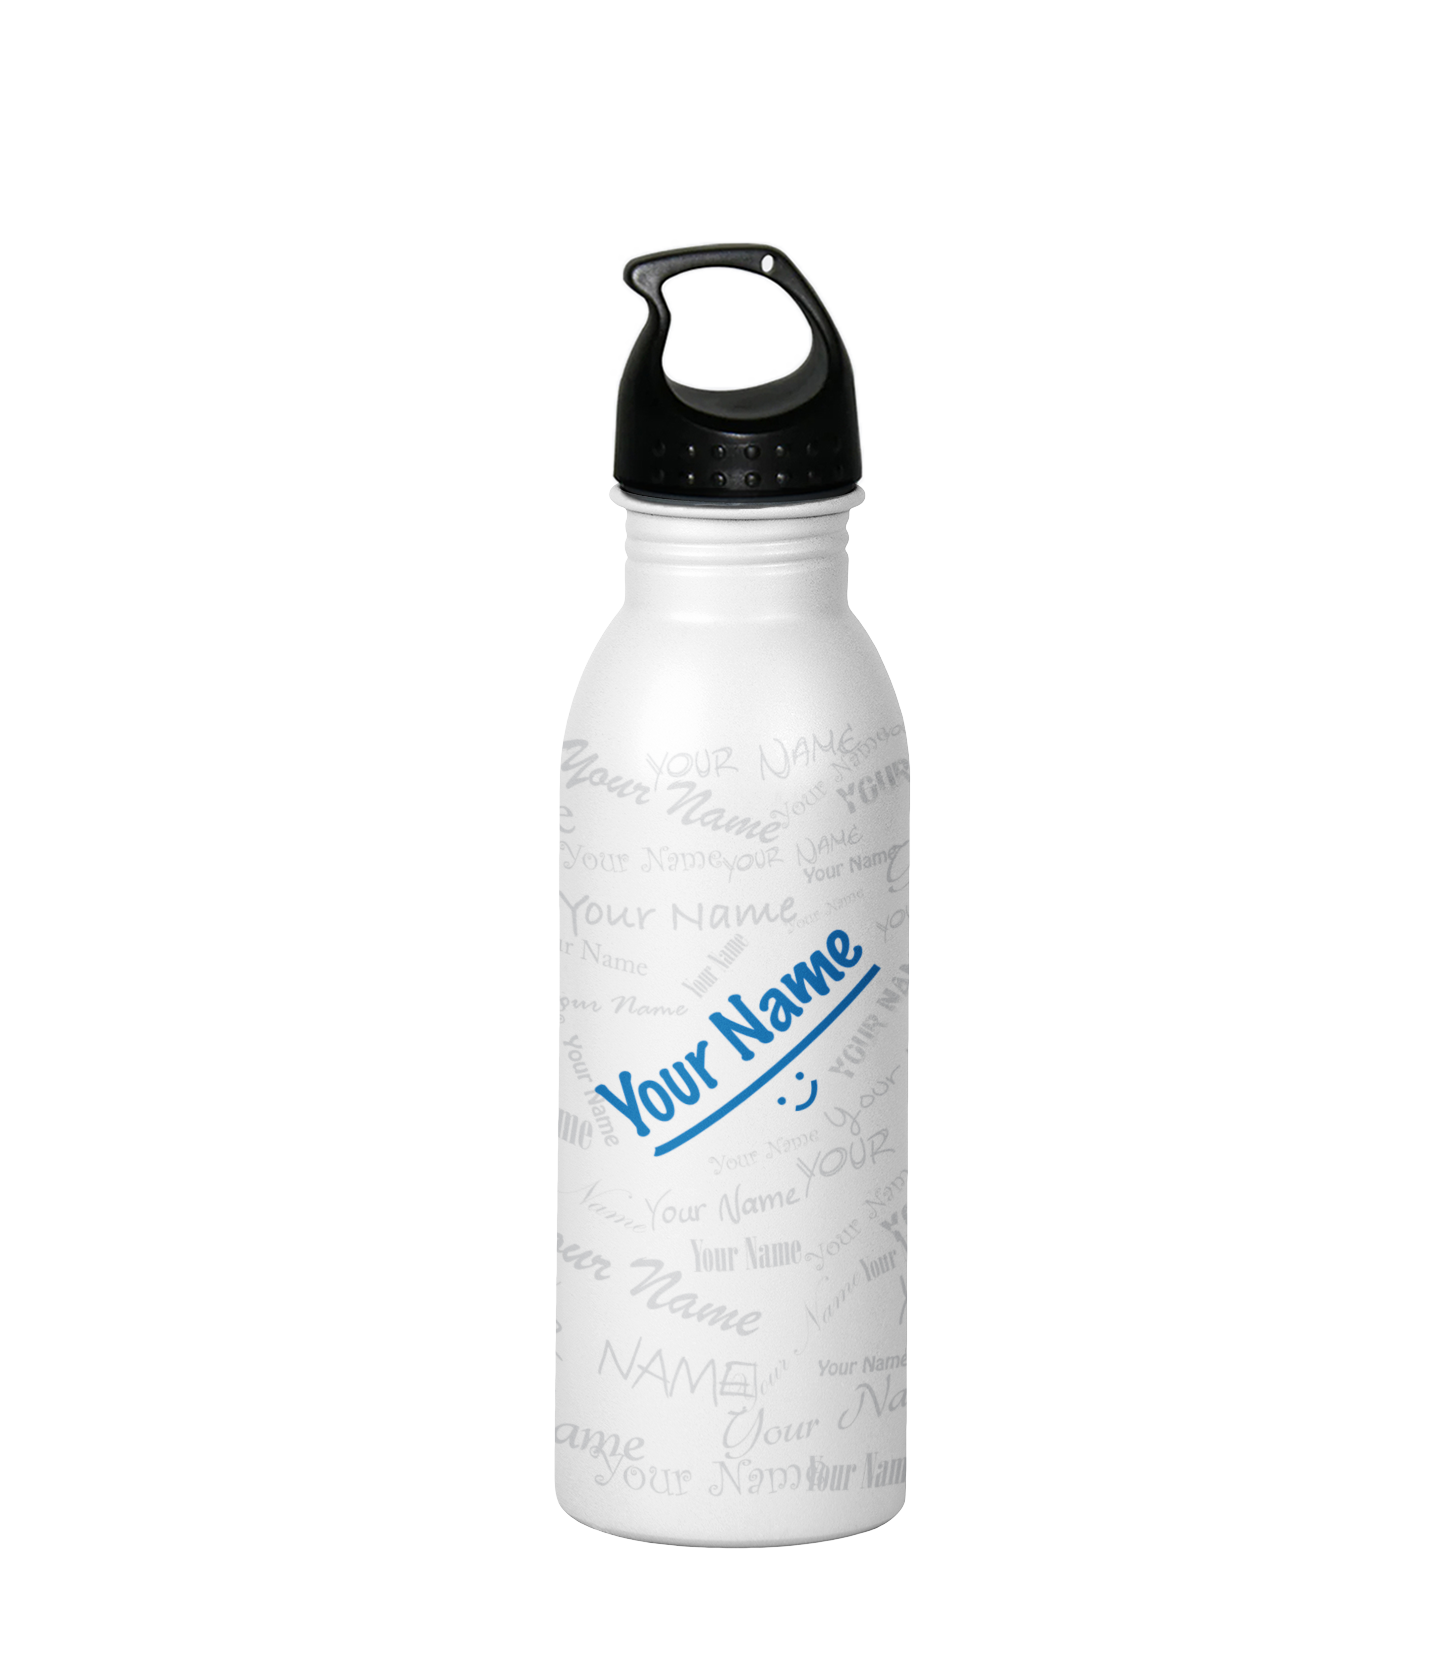 Me! Graffiti Bottle - Personalized Stainless Steel Name Water Bottle(Wide Mouth), 750 ml, 1Pc